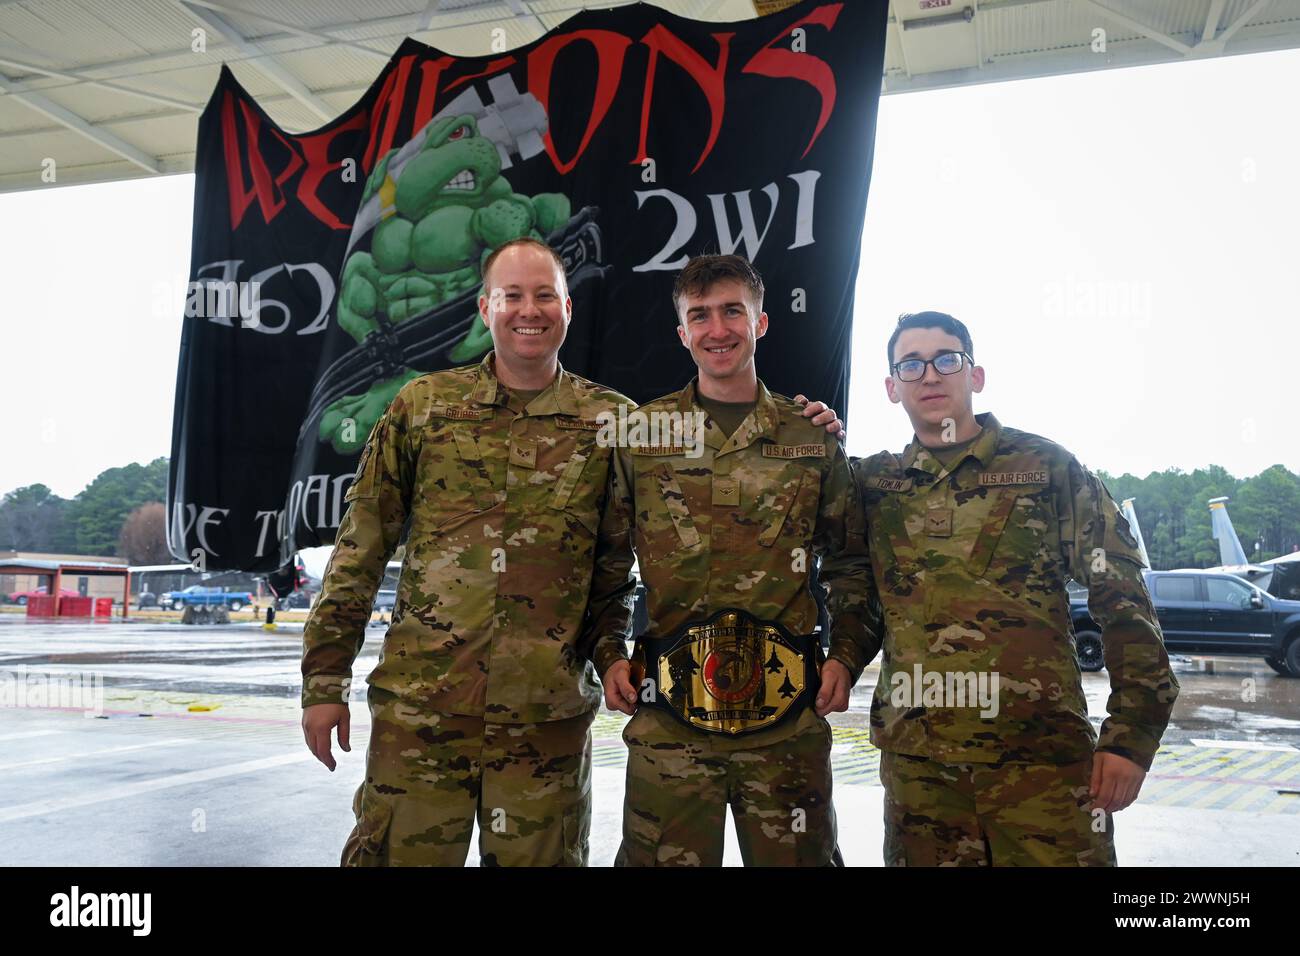 U.S. Air Force Senior Airman Tyler Grubbs, left, Airman Aiden Albritton, and Airman 1st Class Seth Tomlin, right, all assisted dedicated crew chiefs assigned to the 333rd Fighter Generation Squadron, pose for a photo after winning 1st place at an annual load crew competition at Seymour Johnson Air Force Base, North Carolina, on February 23, 2024.  Air Force Stock Photo